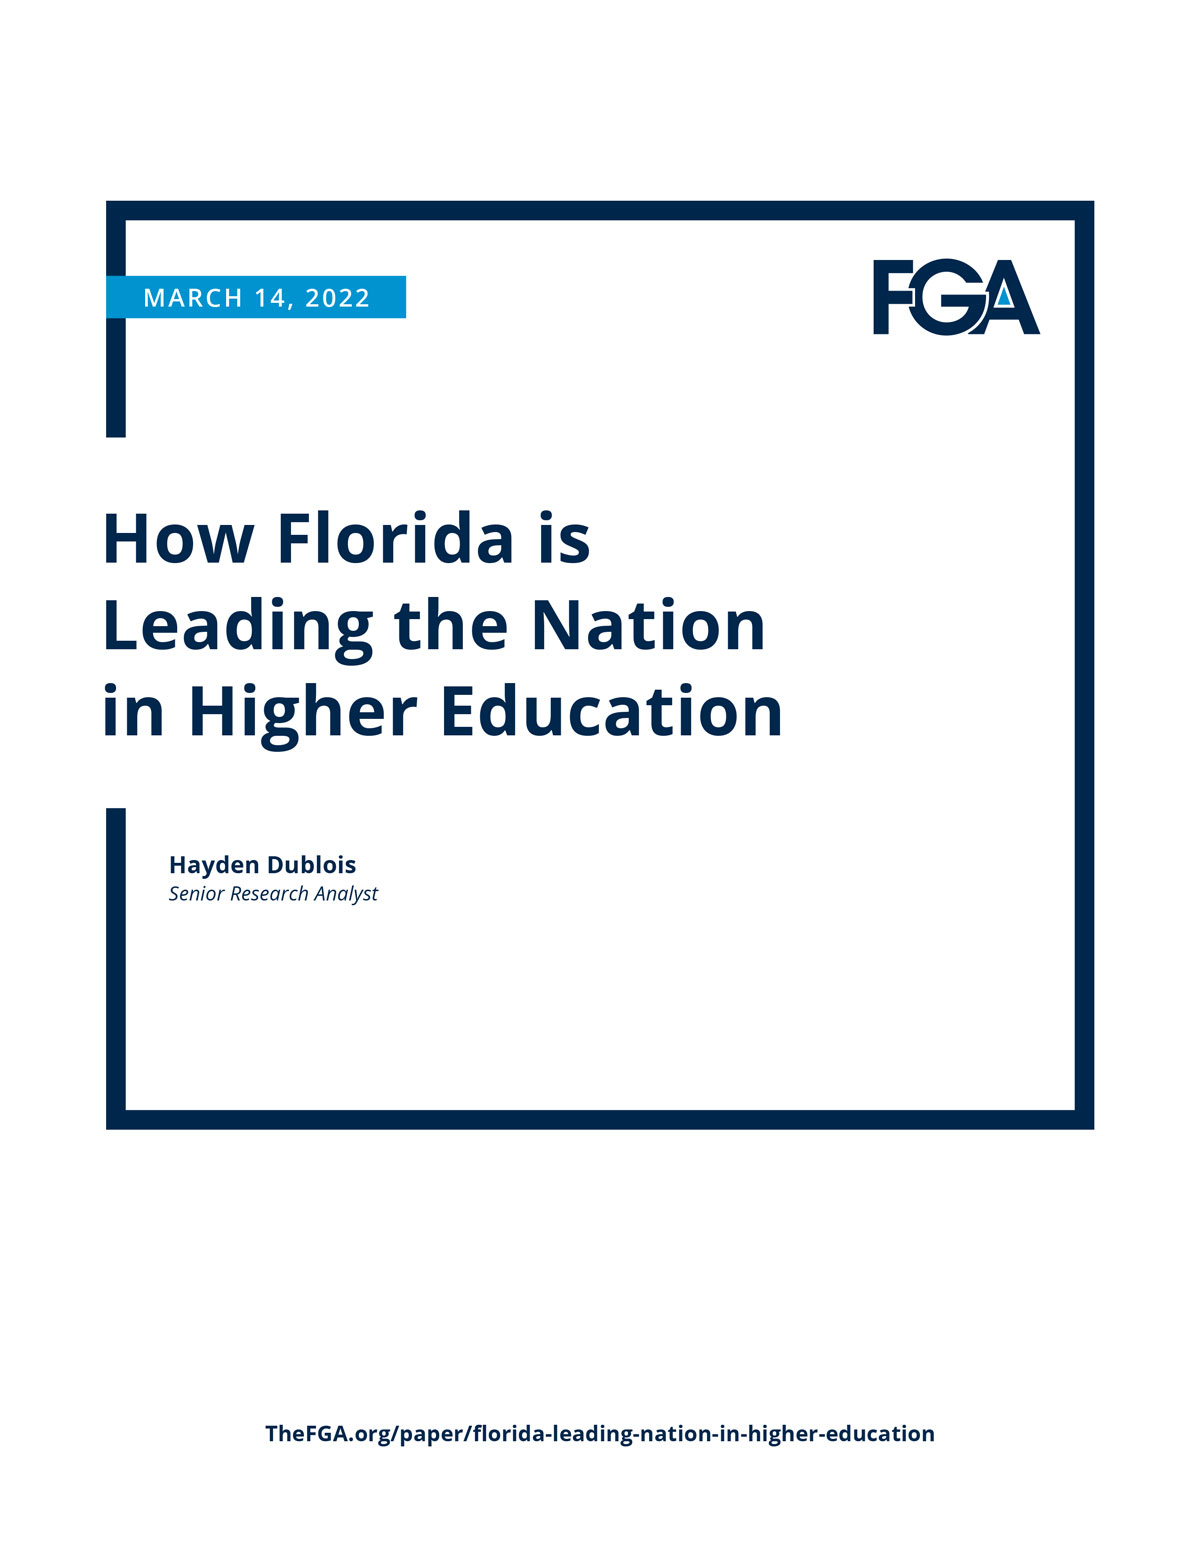 How Florida is Leading the Nation in Higher Education